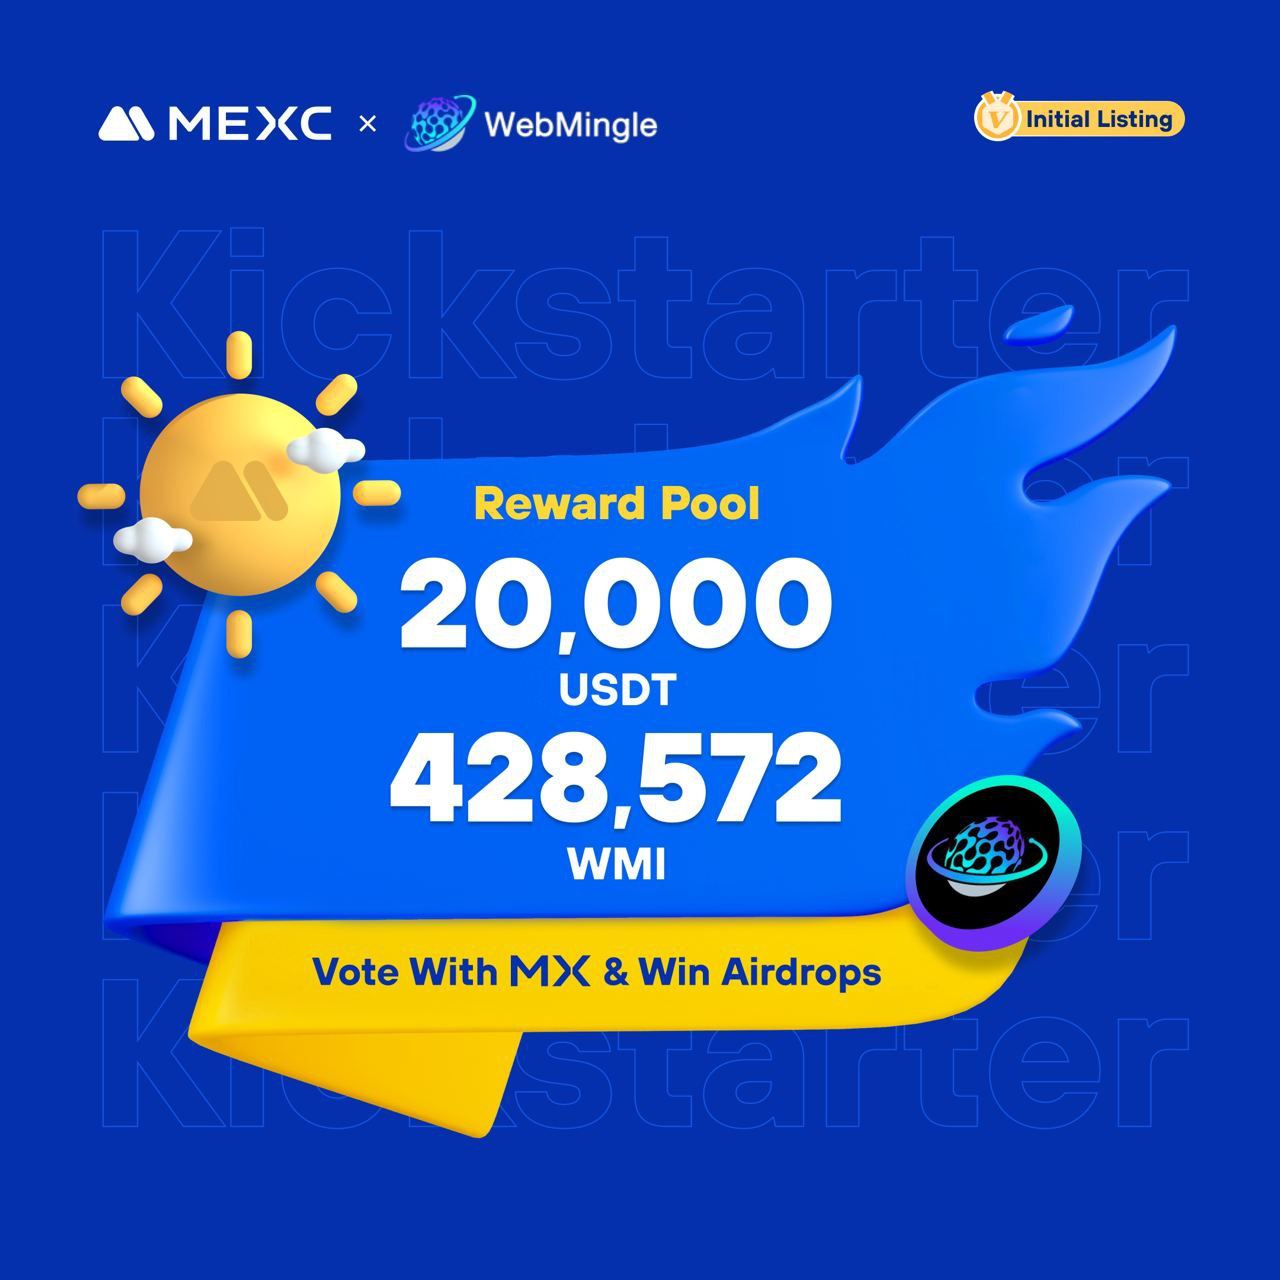 MEXC Kickstarter - Vote to Win Free 460,000 BollyCoin (BOLLY) Airdrops! -  CoinCu News